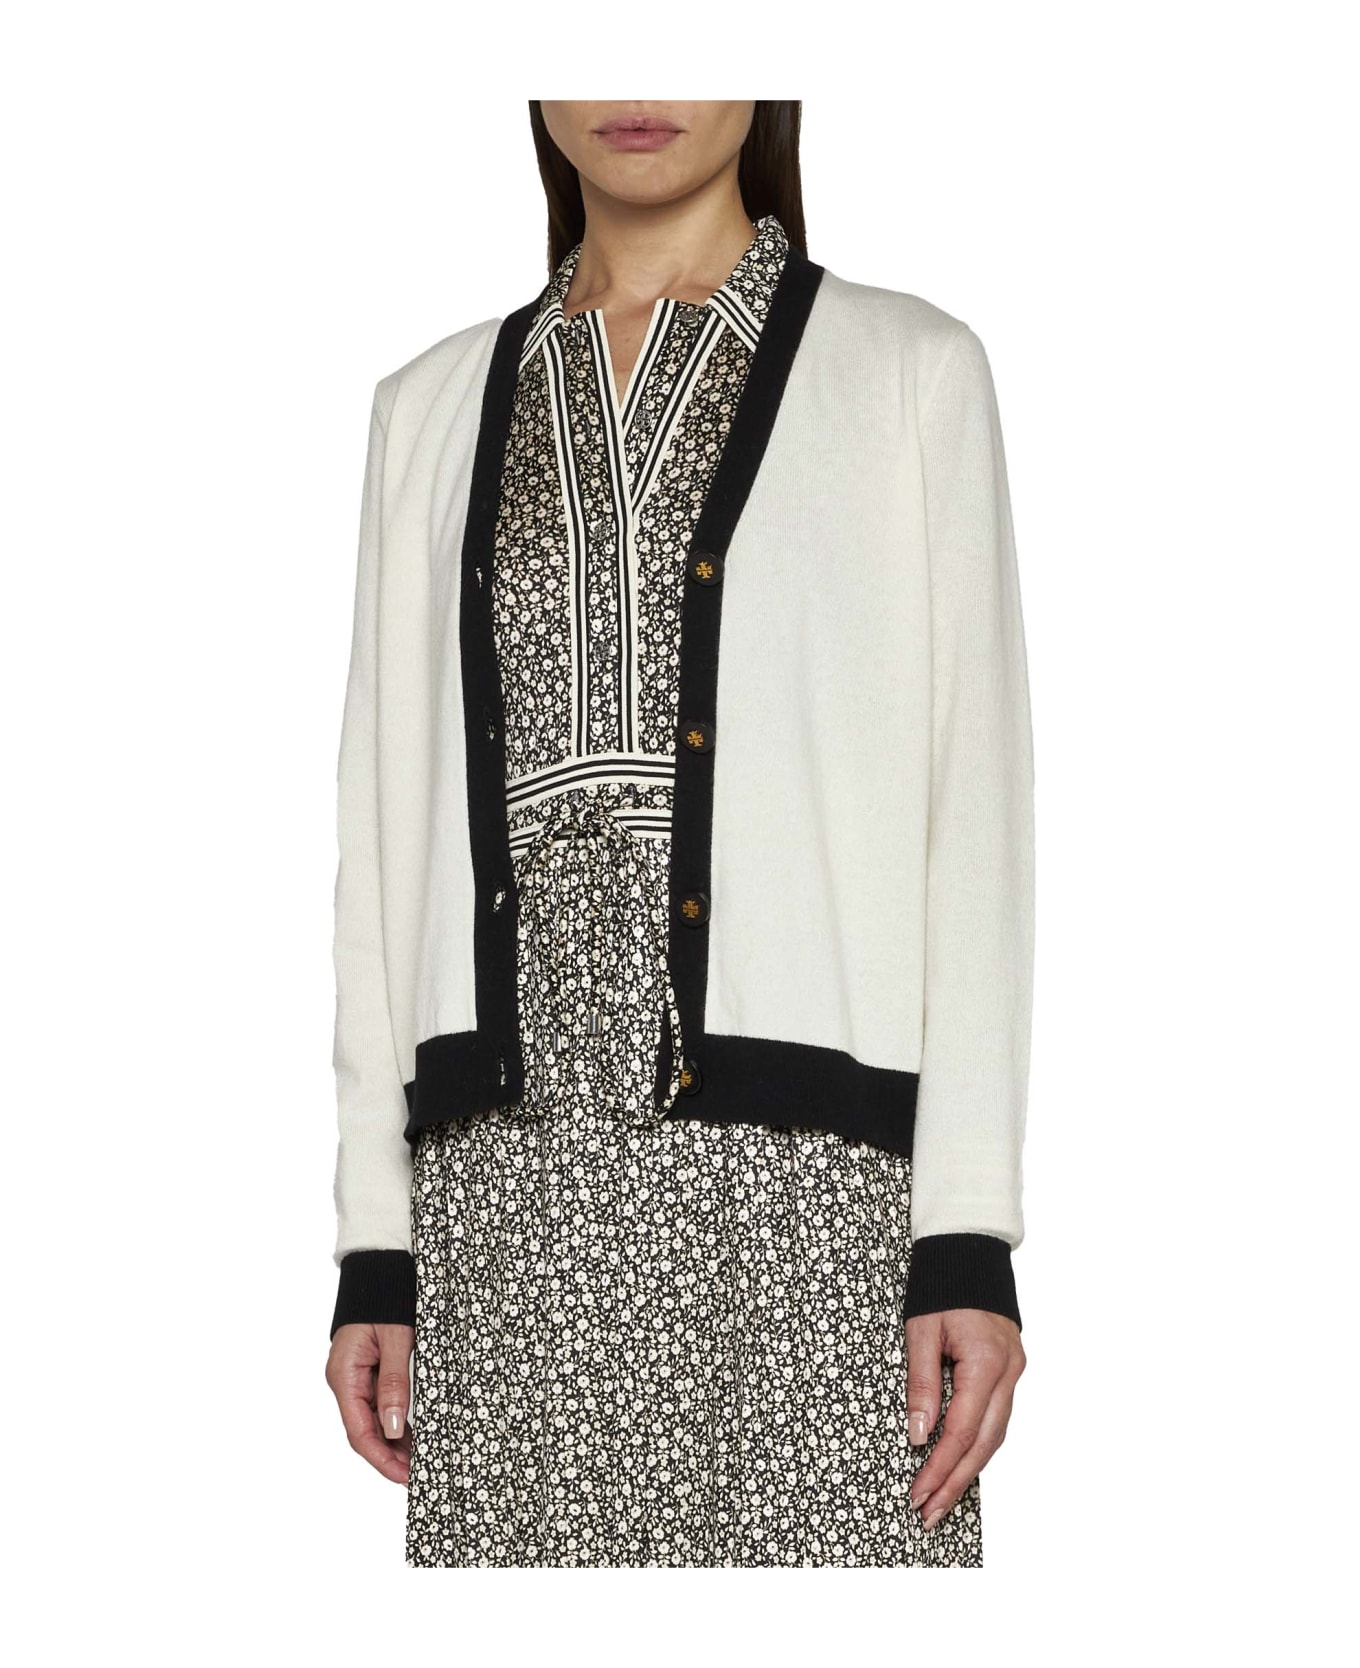 Tory Burch Cardigan With Contrasting Finish - Soft ivory black カーディガン